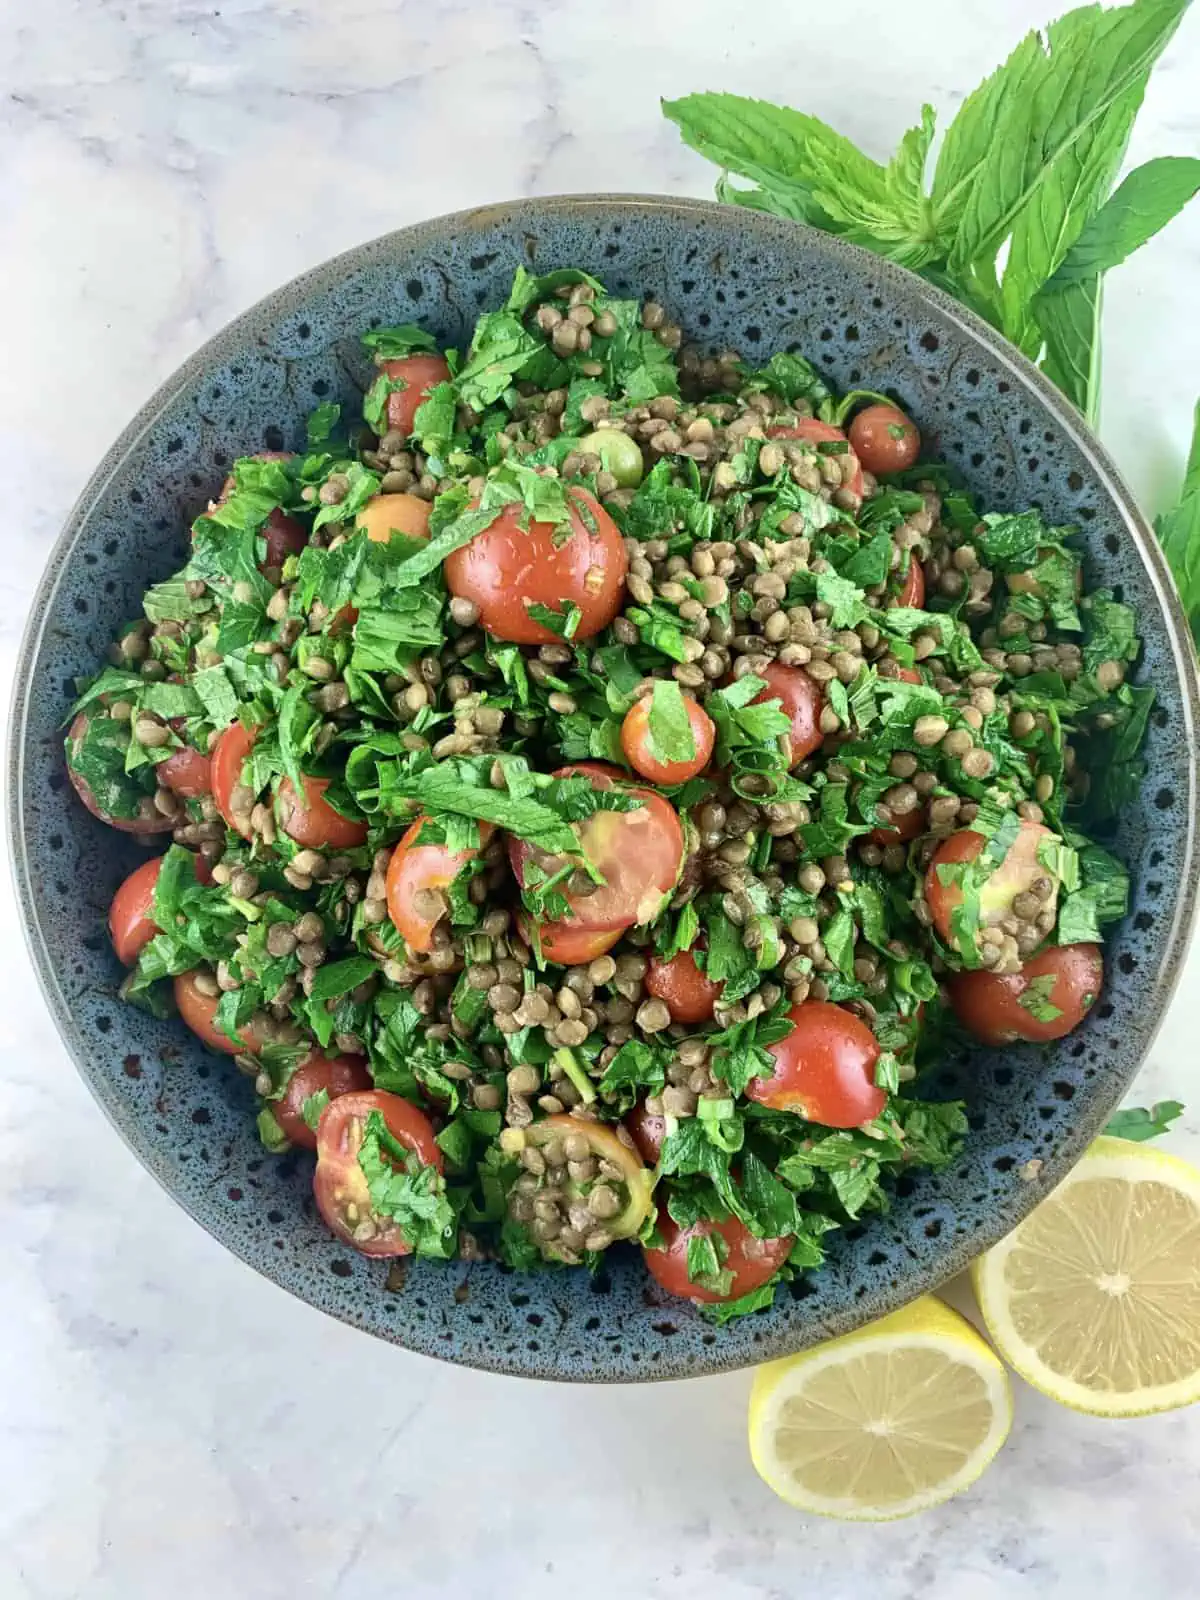 Lentil tabbouleh in a dark grey bowl with lemon halves and sprigs of mint on the side.